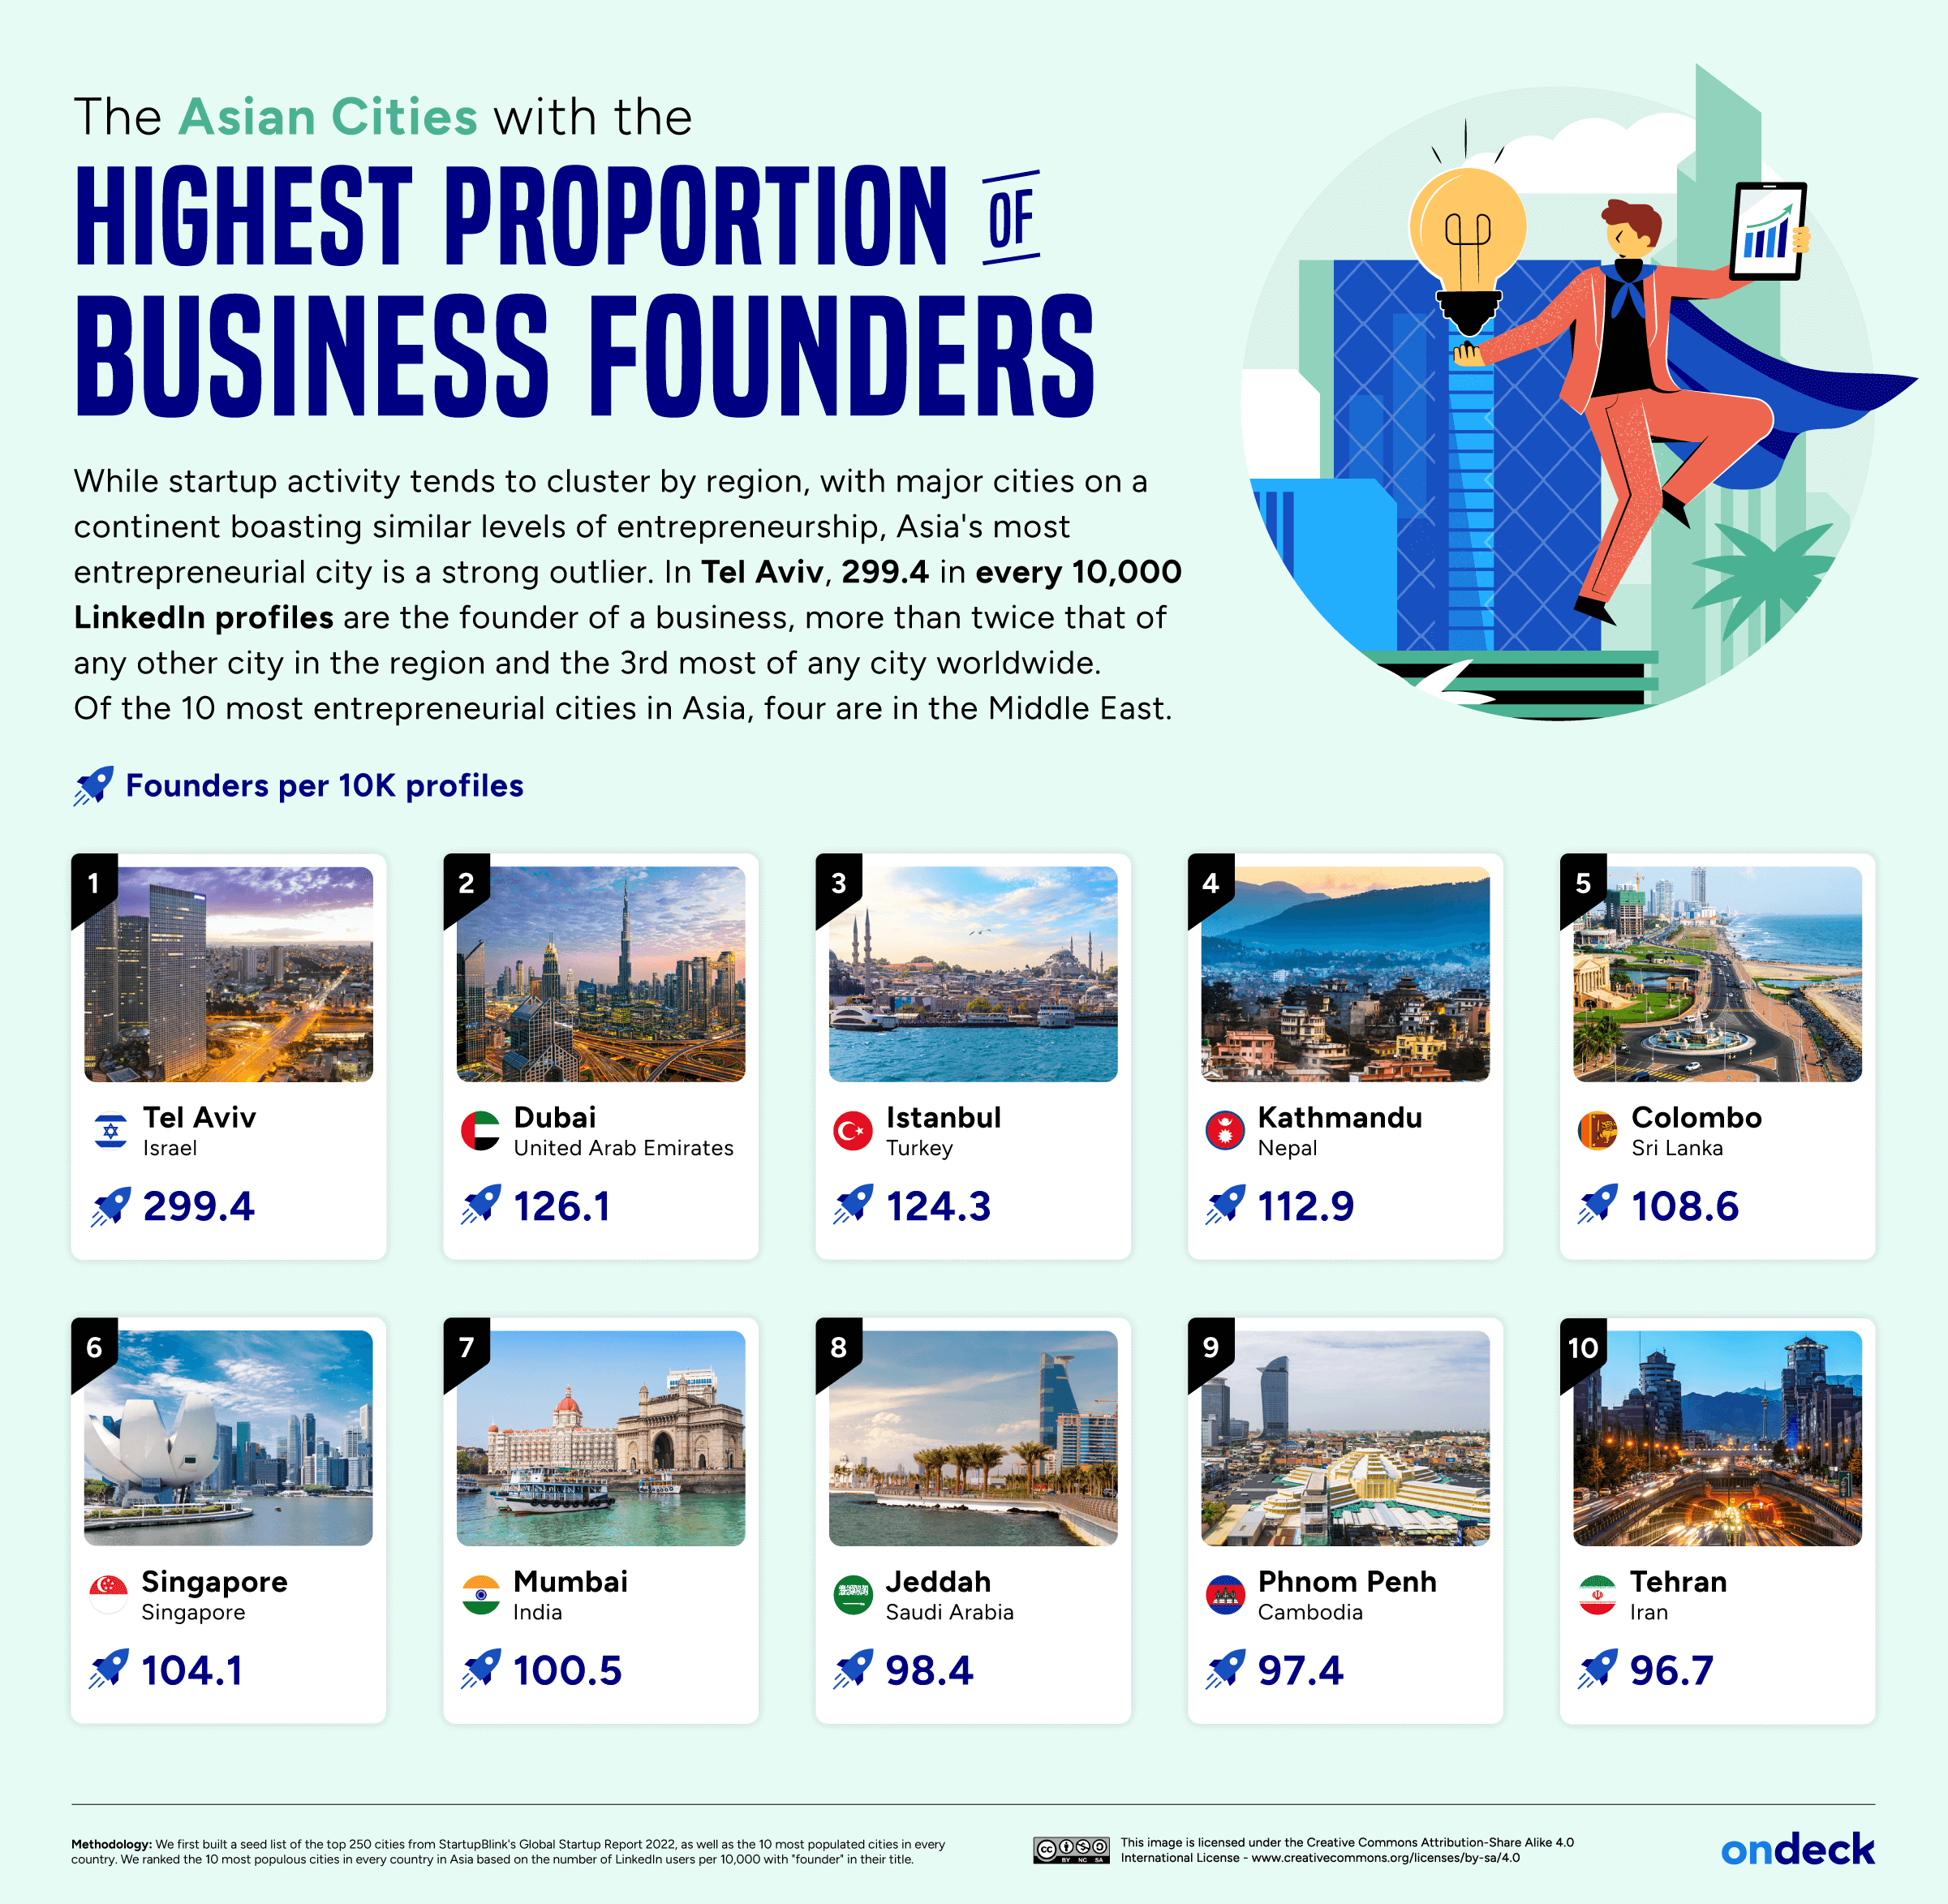 Infographic showing the Asian cities with the most business founders